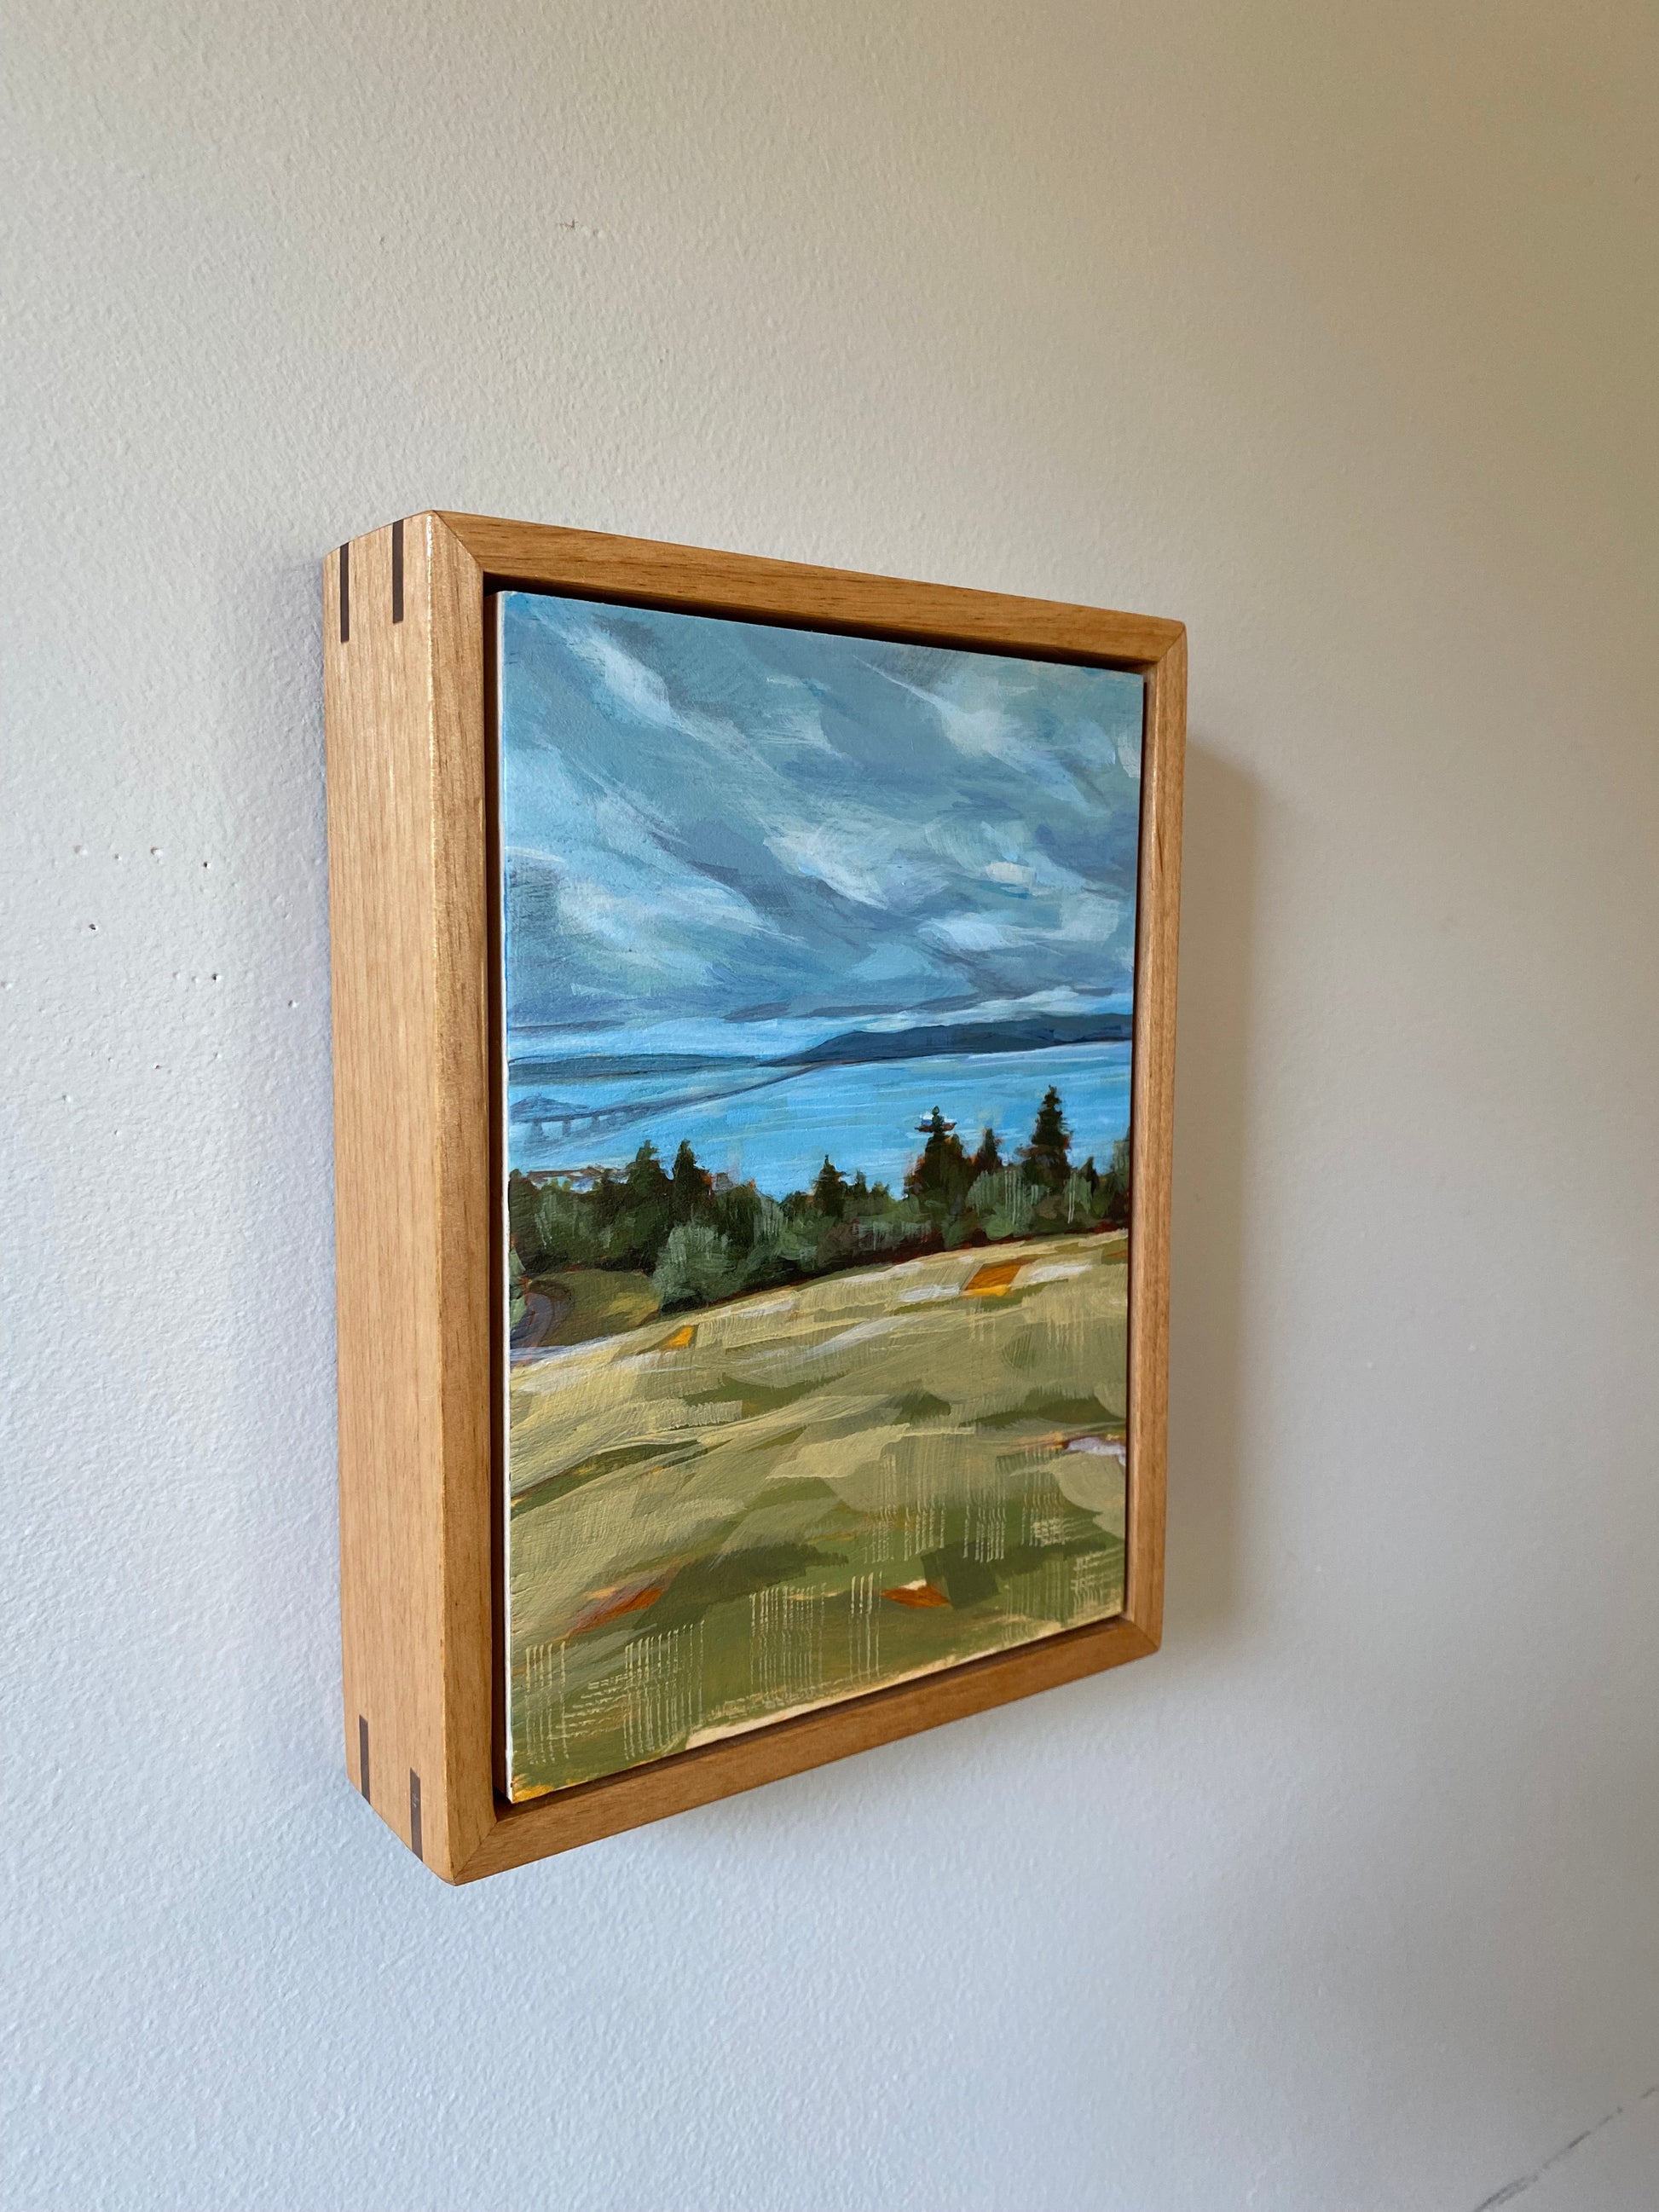 5x7 Original Landscape Art of Astoria. Framed Nature Art featuring trees, water and clouds.